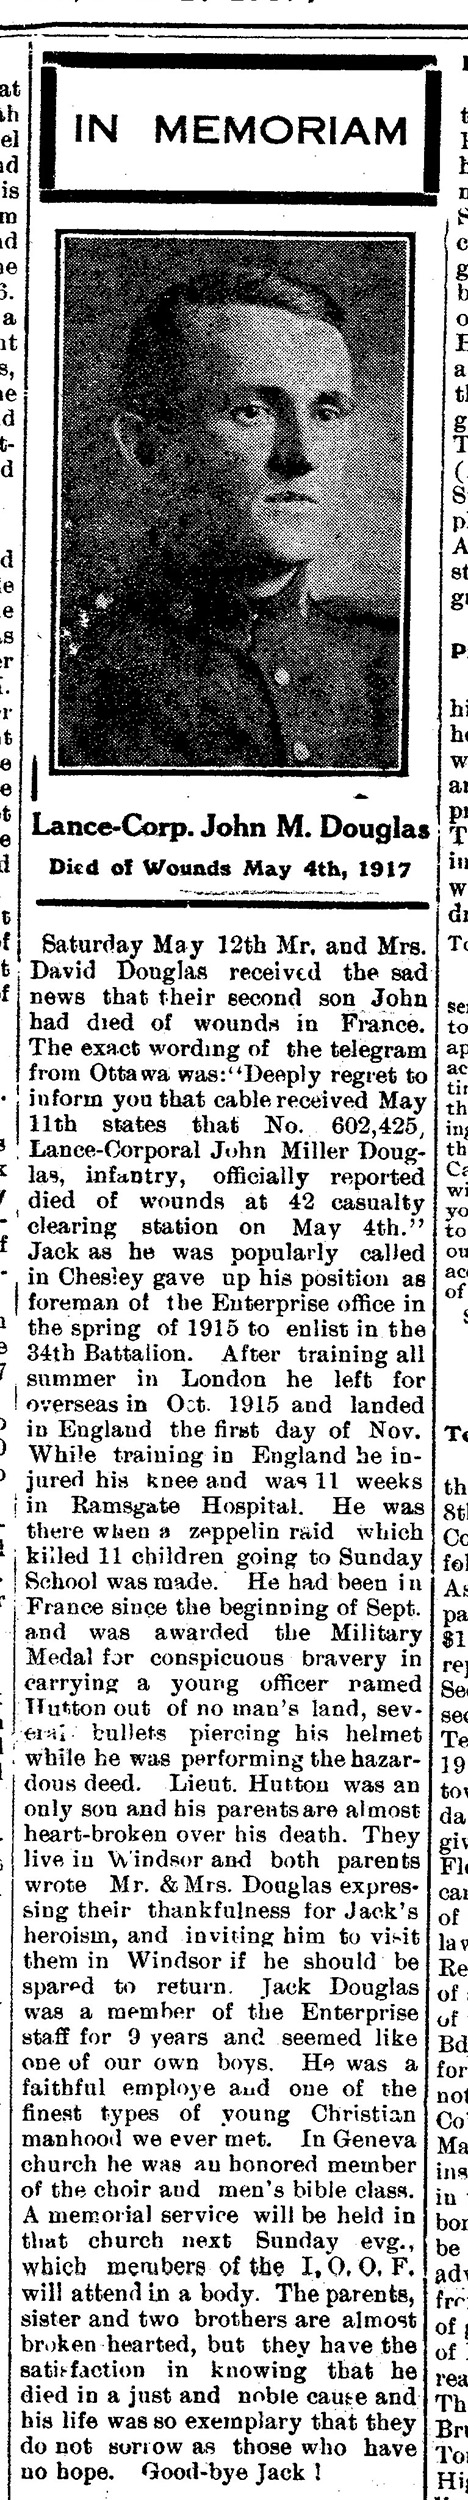 The Chesley Enterprise, May 17, 1915